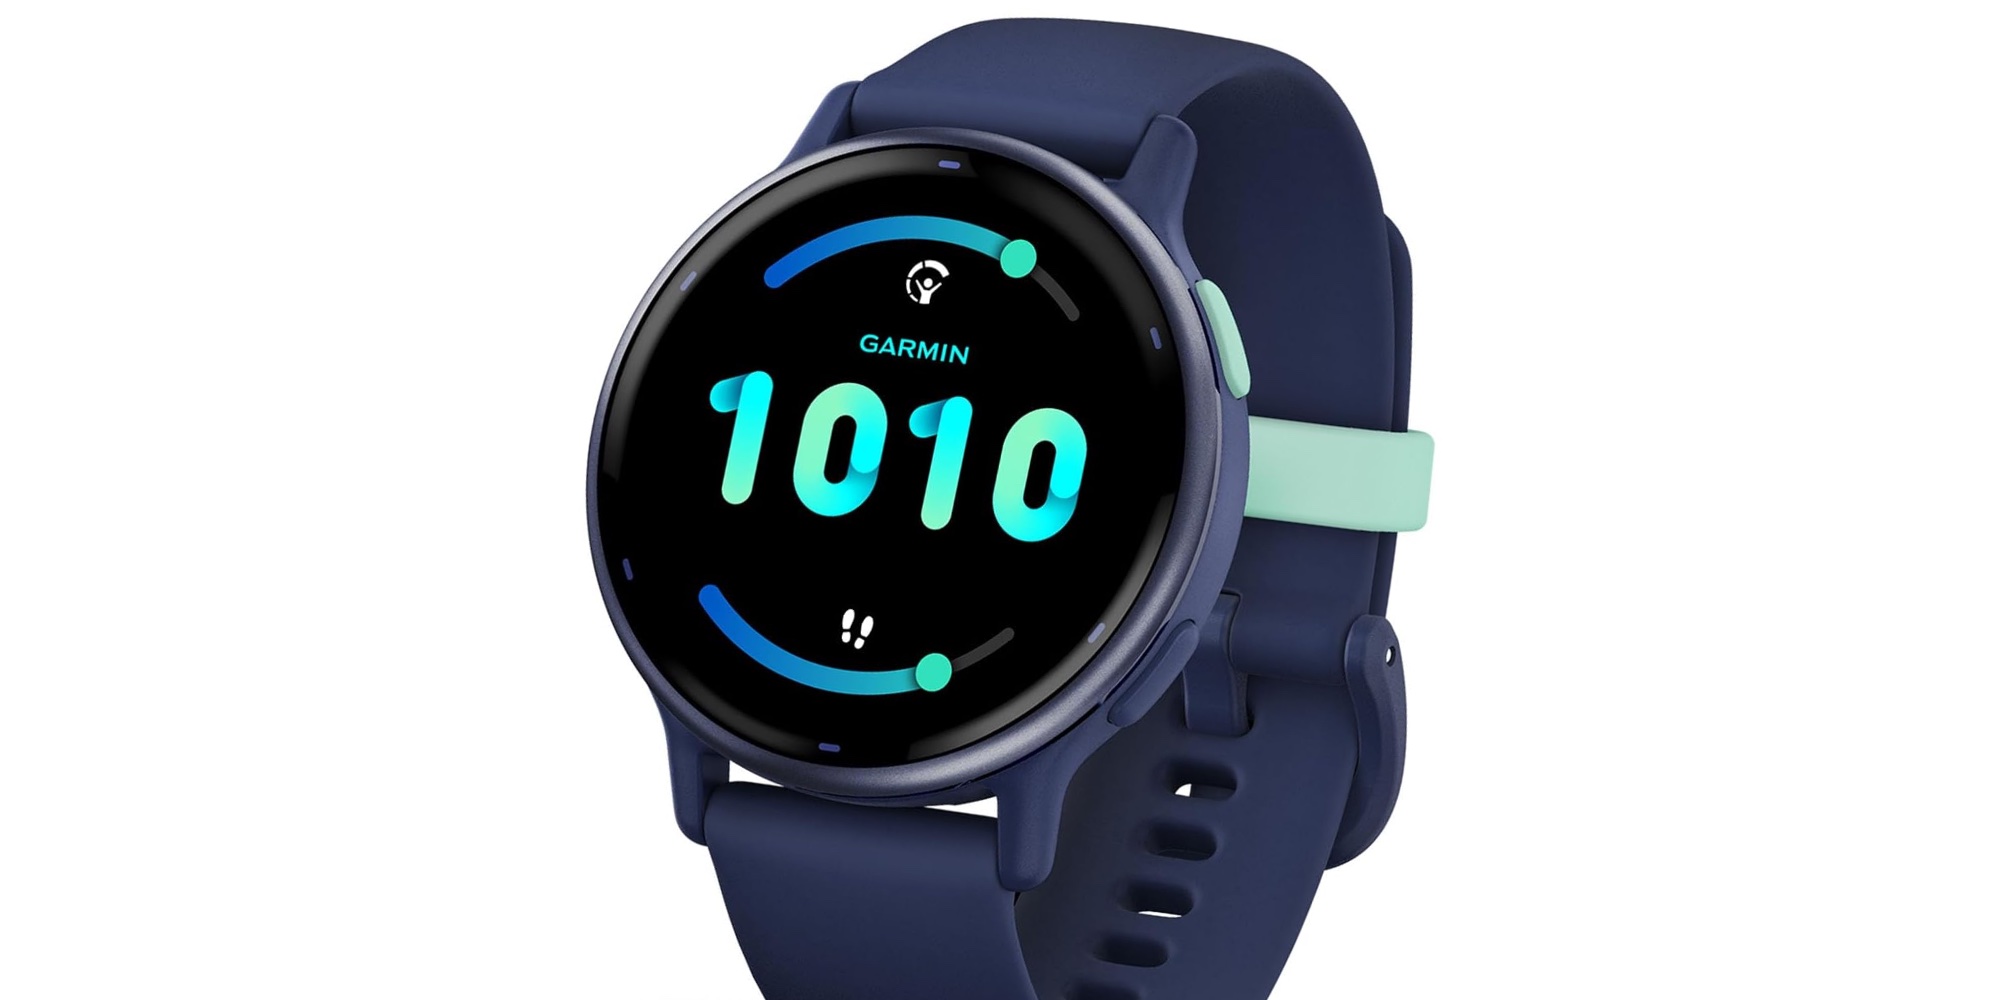 Garmin Vivoactive 5: a smartwatch with 11 days of battery life and